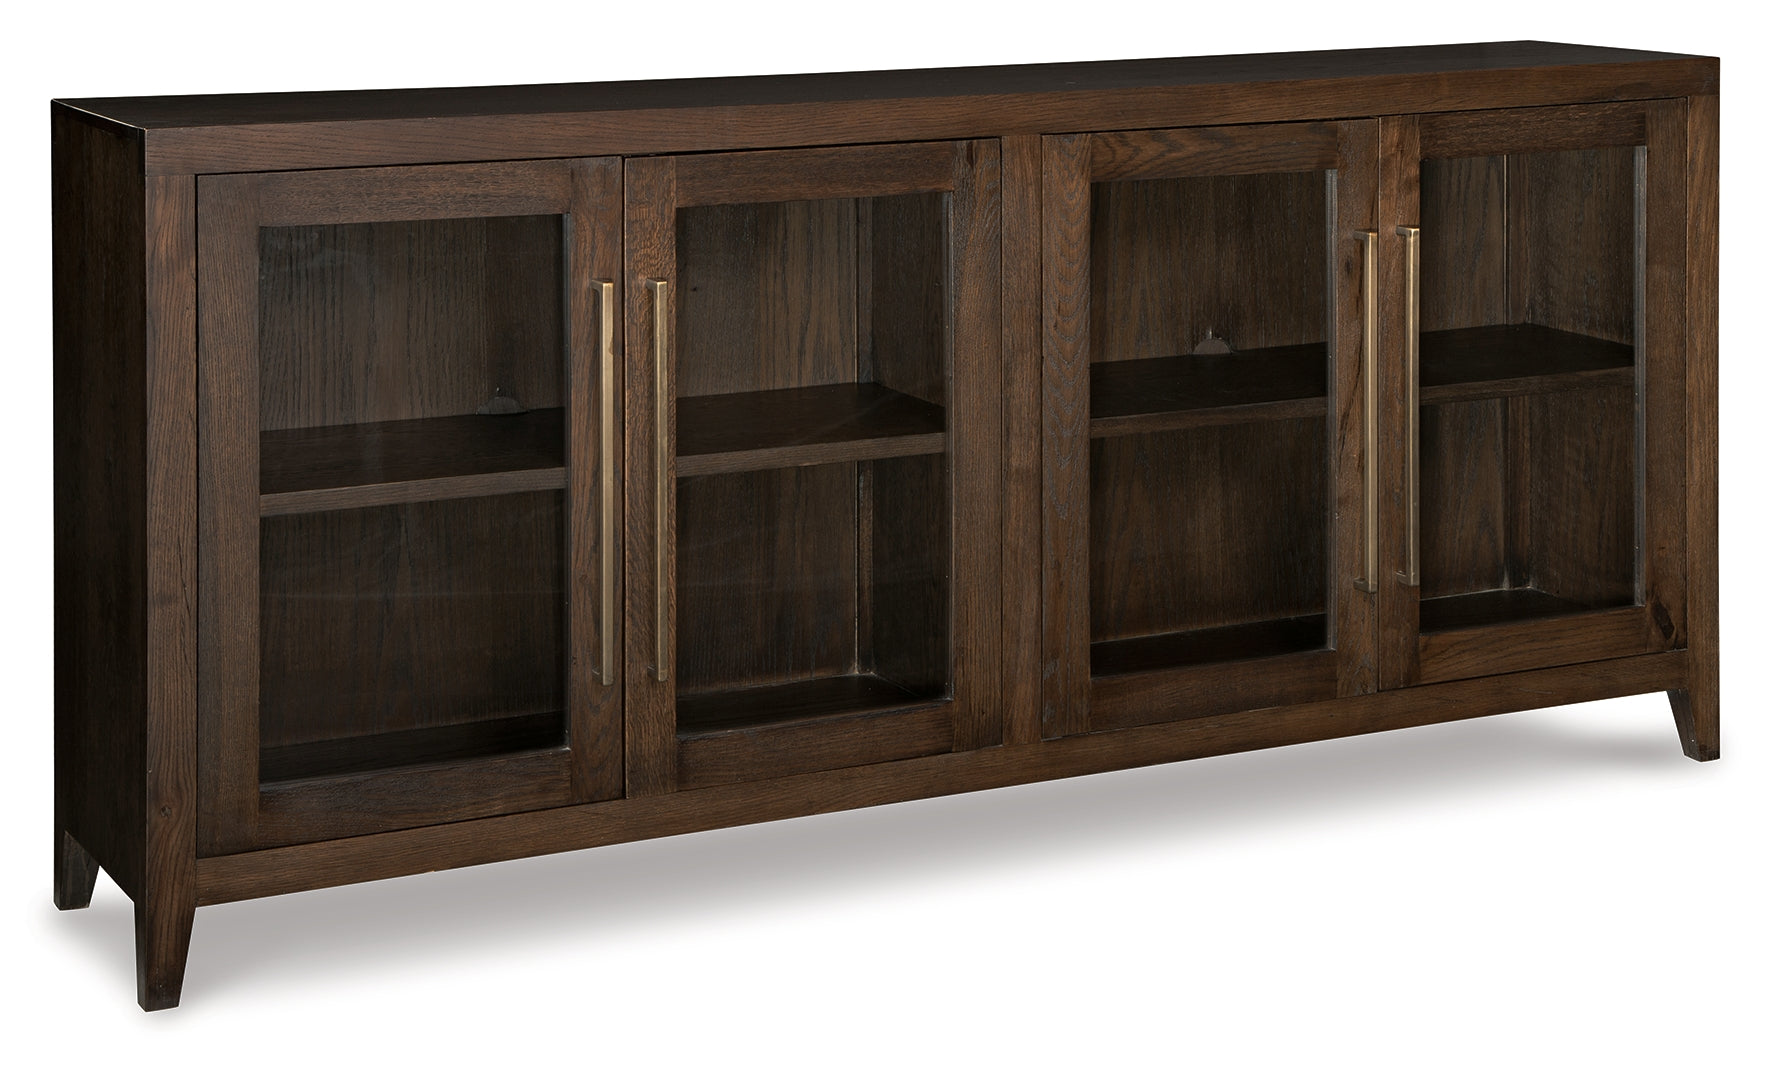 Balintmore Accent Cabinet